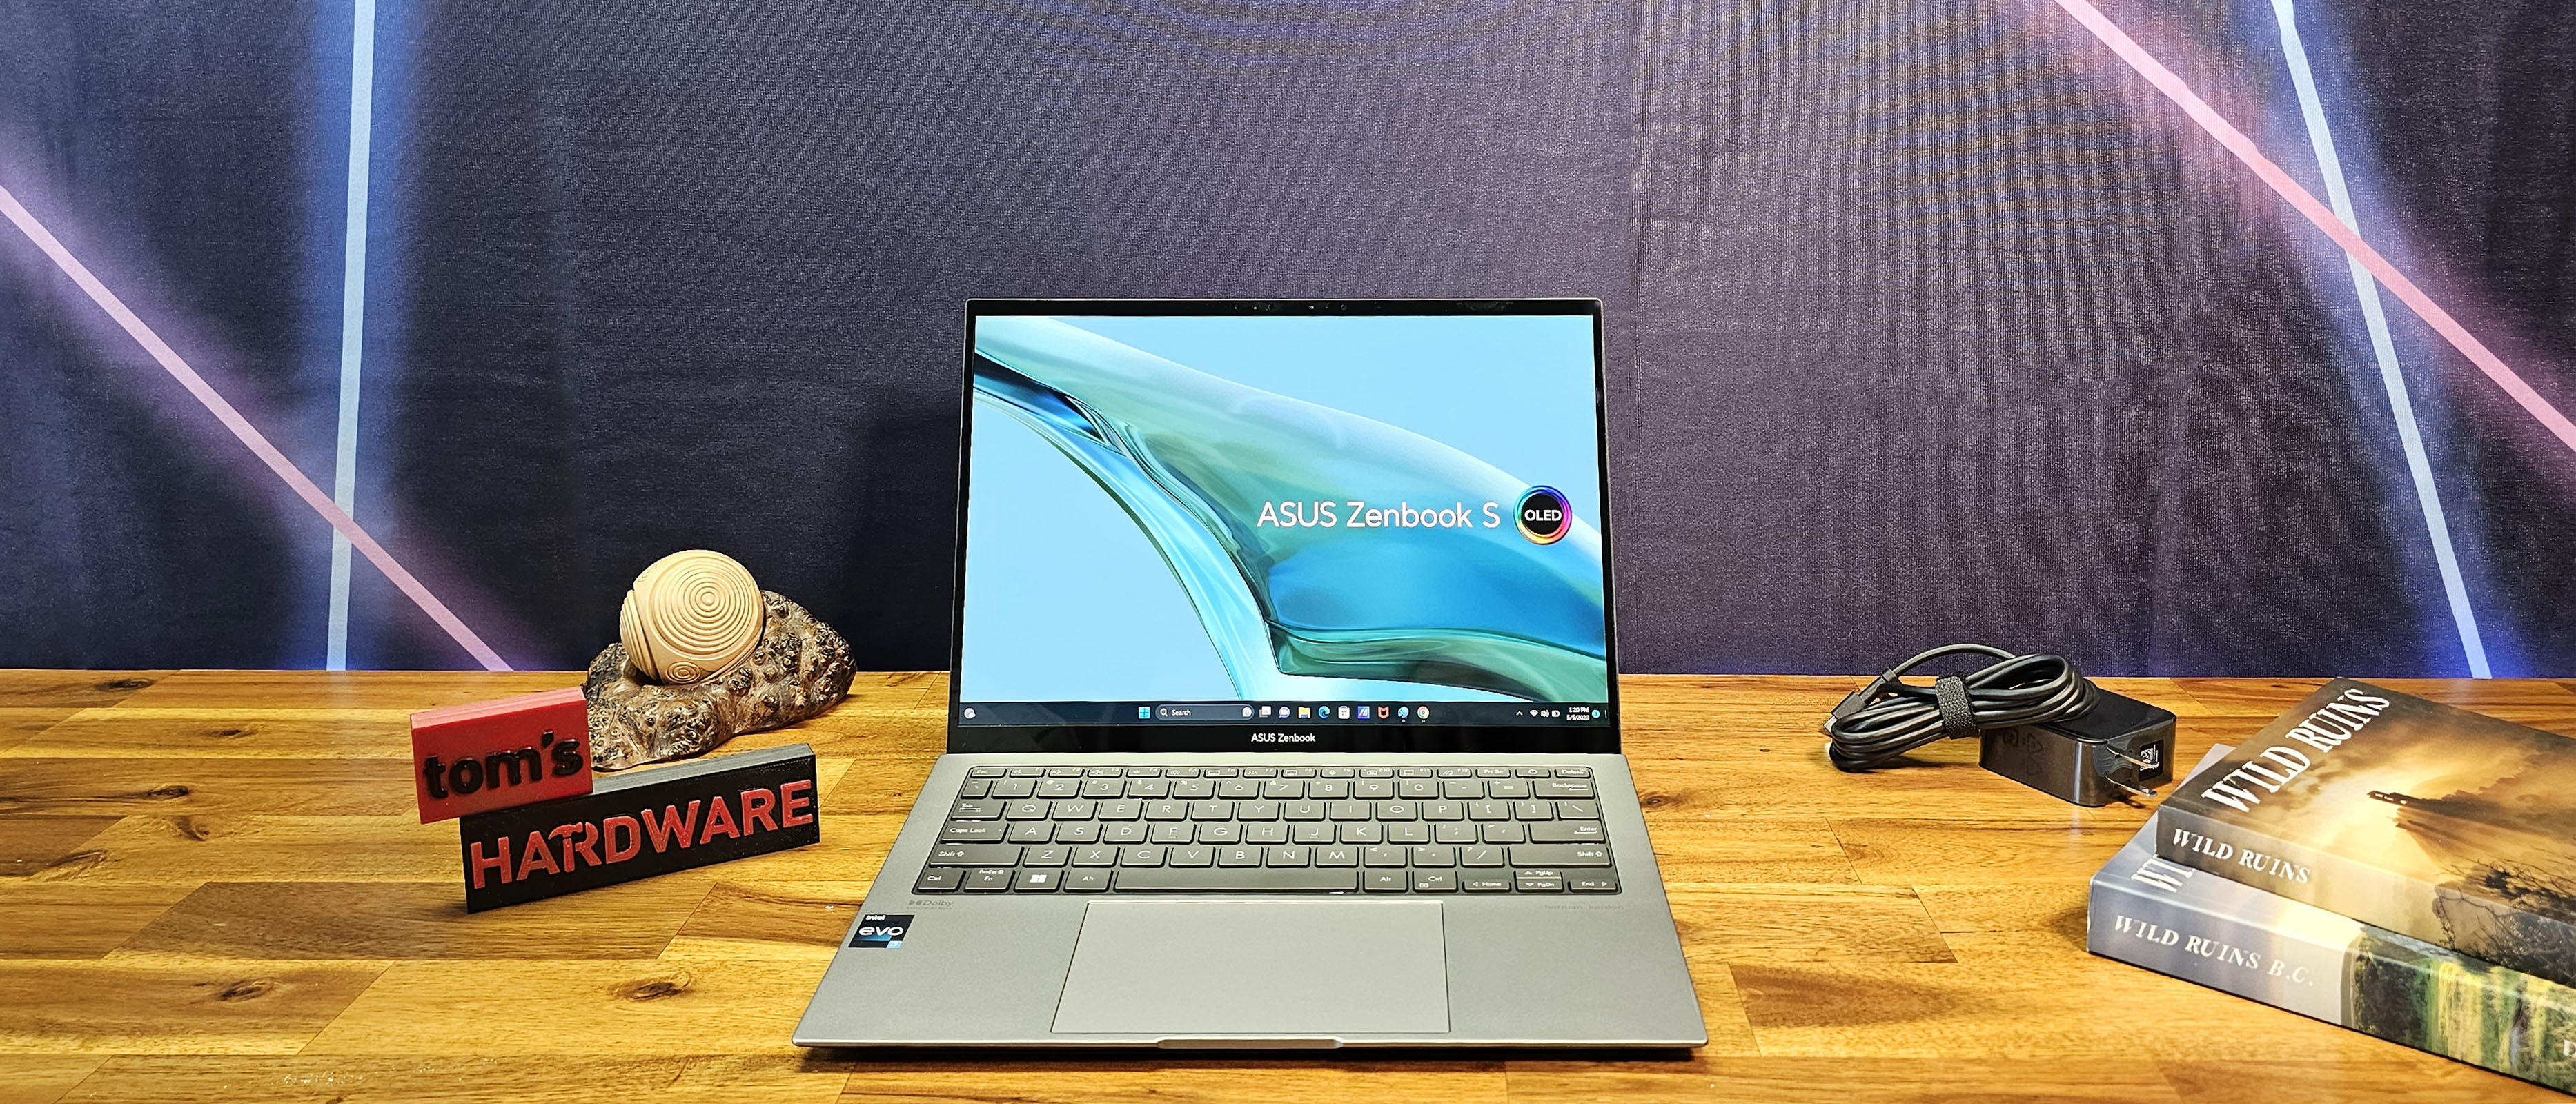 Asus ZenBook 13 Review - A compact 13-inch laptop with a fast